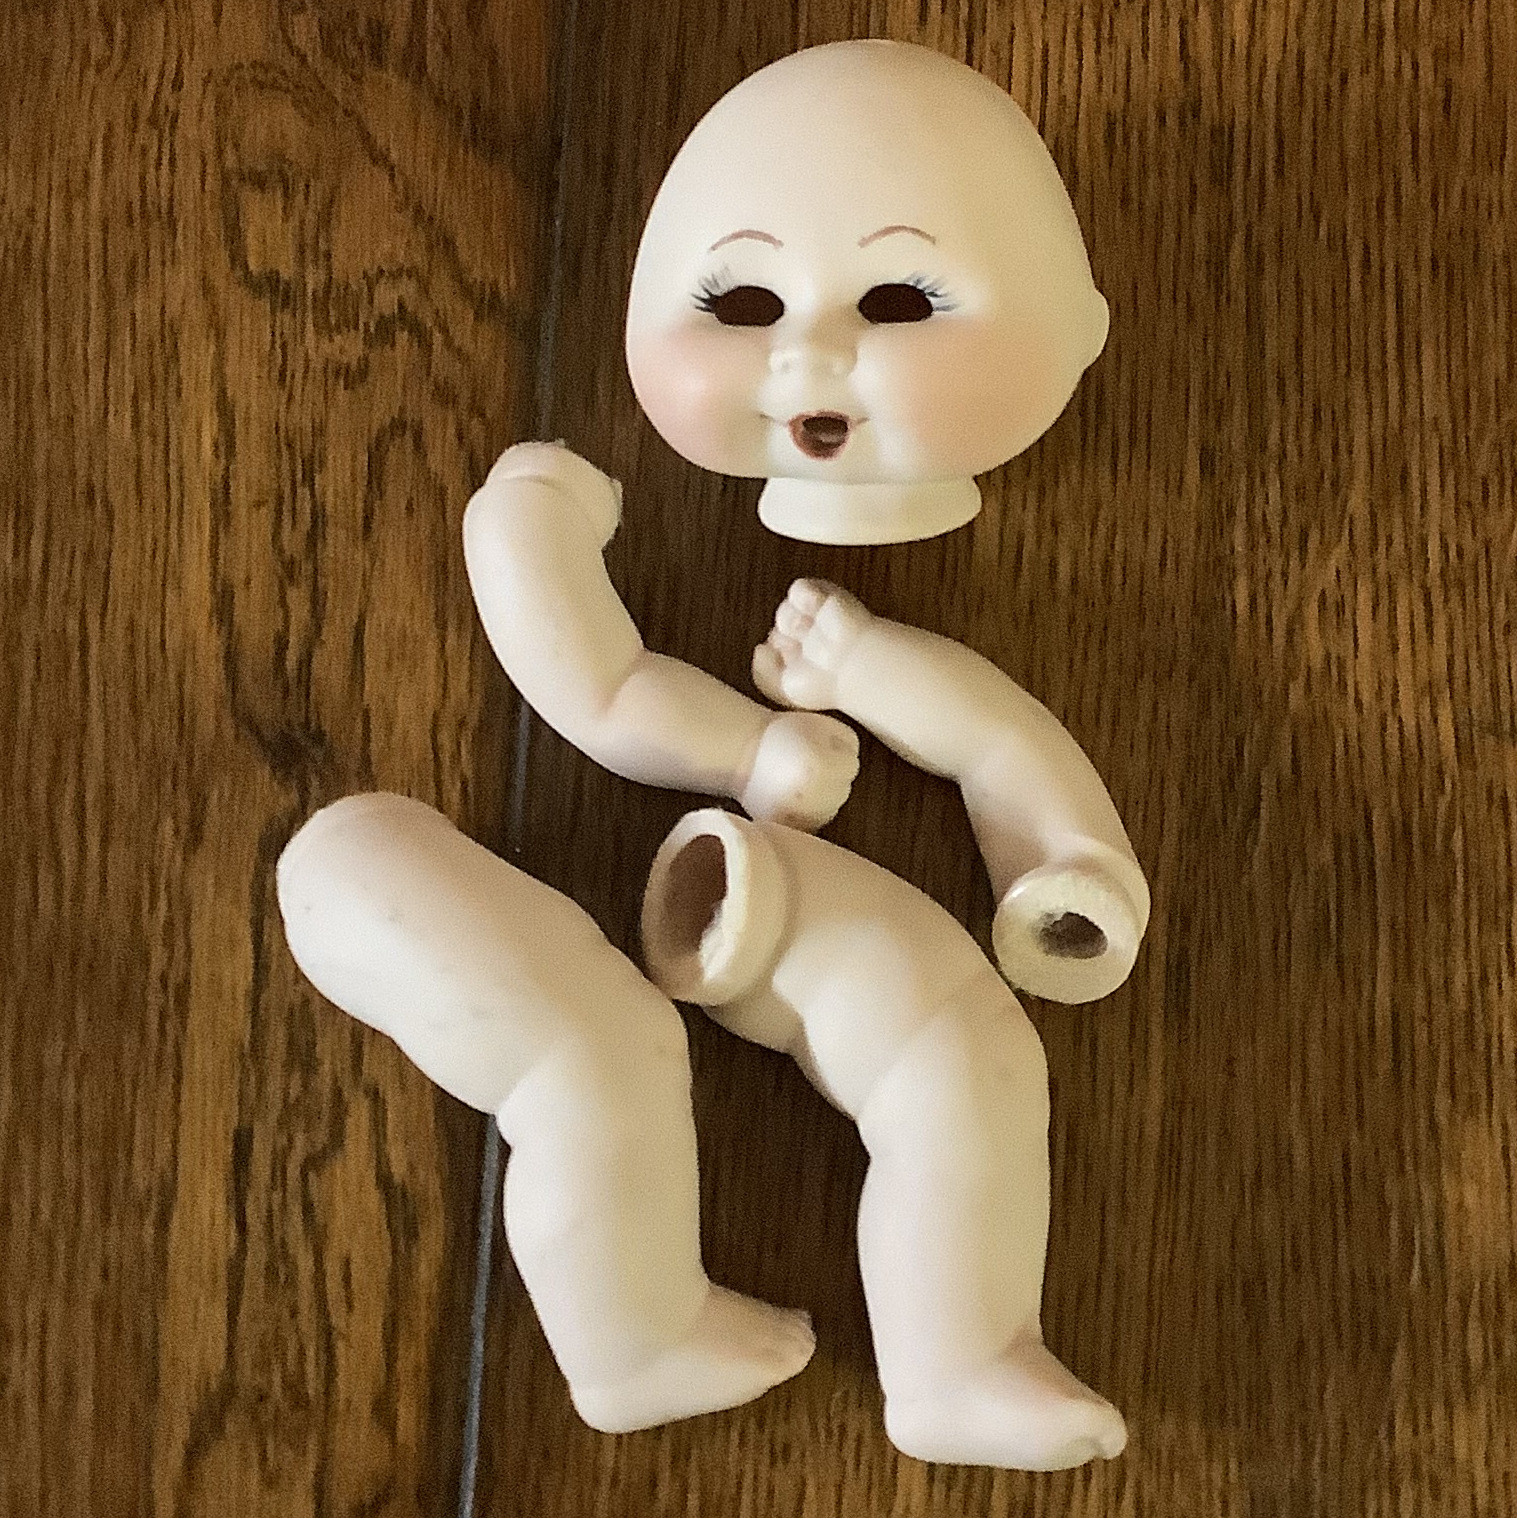 Doll parts including a light-skinned smiling head without eyes, arms, and legs